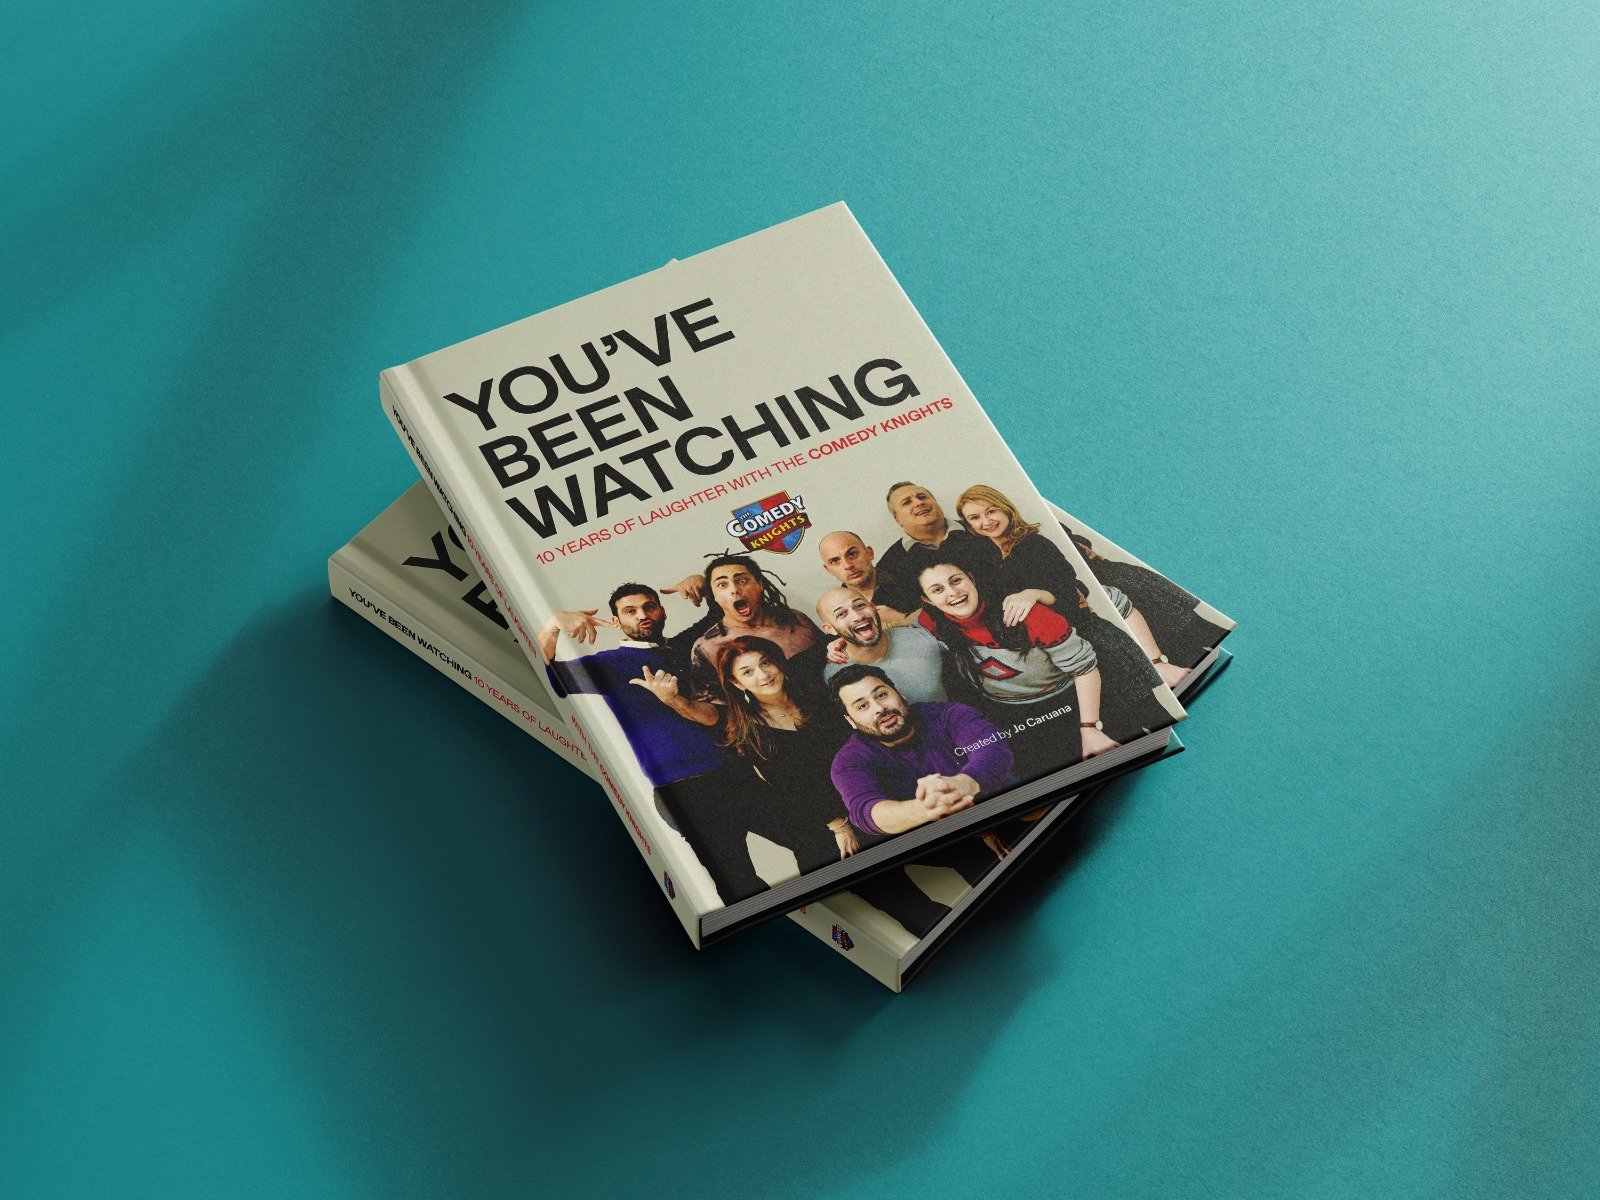 Comedy Knights New Coffee table book - You've been watching ... 10 years of laughter with the comedy knights new york, The Comedy Knights Celebrate (Almost) 10 Years of Laughter with New Book new york, we love new york